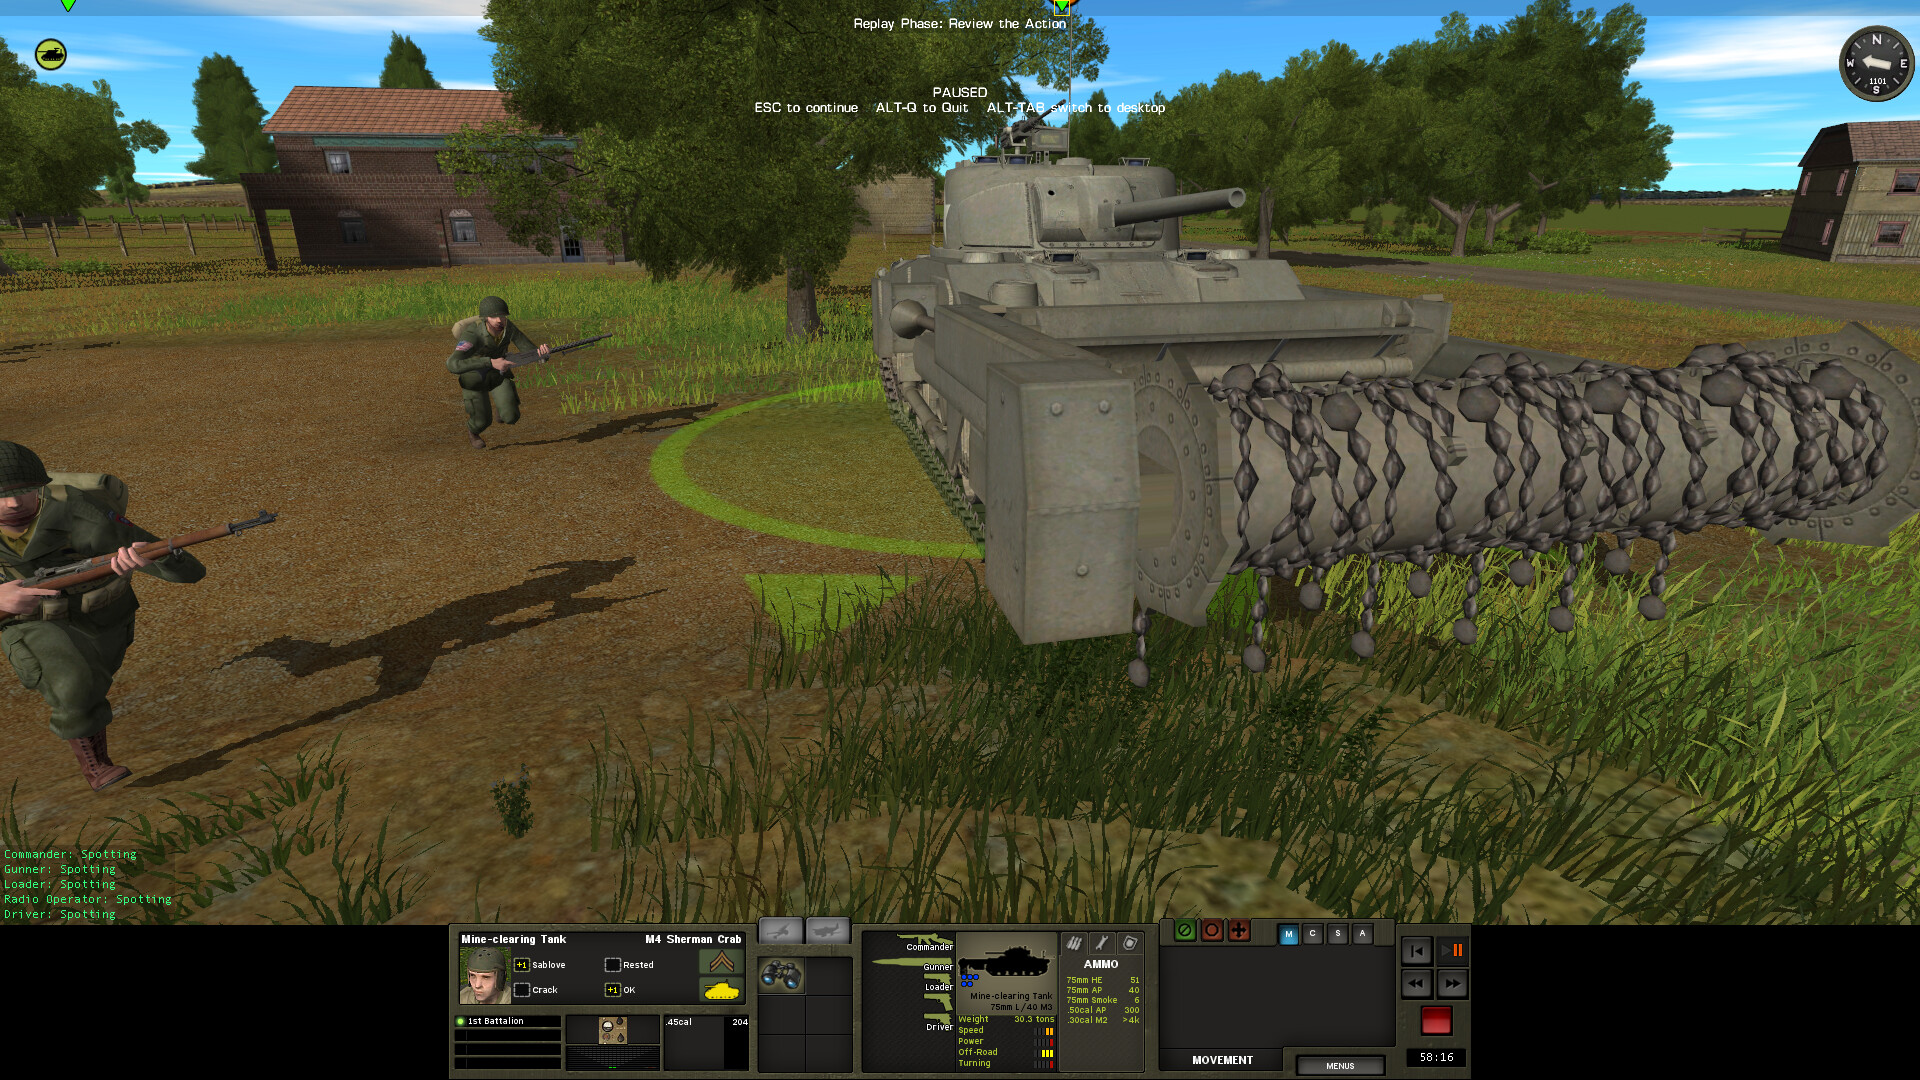 Combat Mission: Battle for Normandy - Vehicle Pack DLC Steam CD Key 8.95$